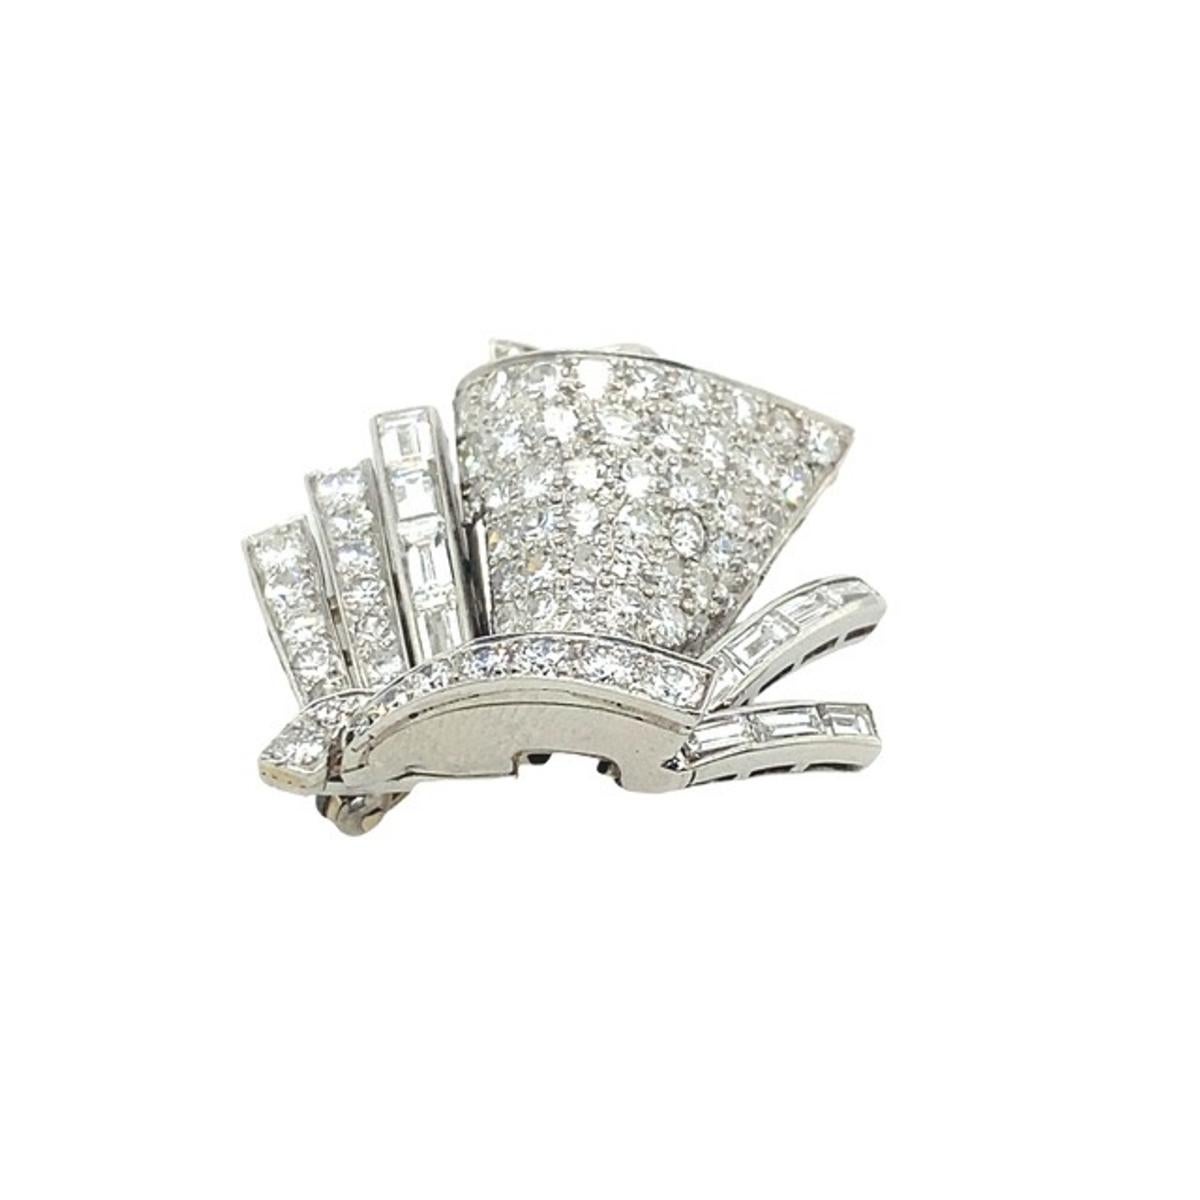 Deco Platinum Brooch Set With 1.0ct of F/VS Baguette + 1.5ct of Round Diamonds.

Additional Information:
Total Weight: 12.1g
Total Diamond Weight: 2.50ct
Diamond Colour: E/G
Diamond Purity: VS
Brooch Size: 27mm x 27mm
SMS5263